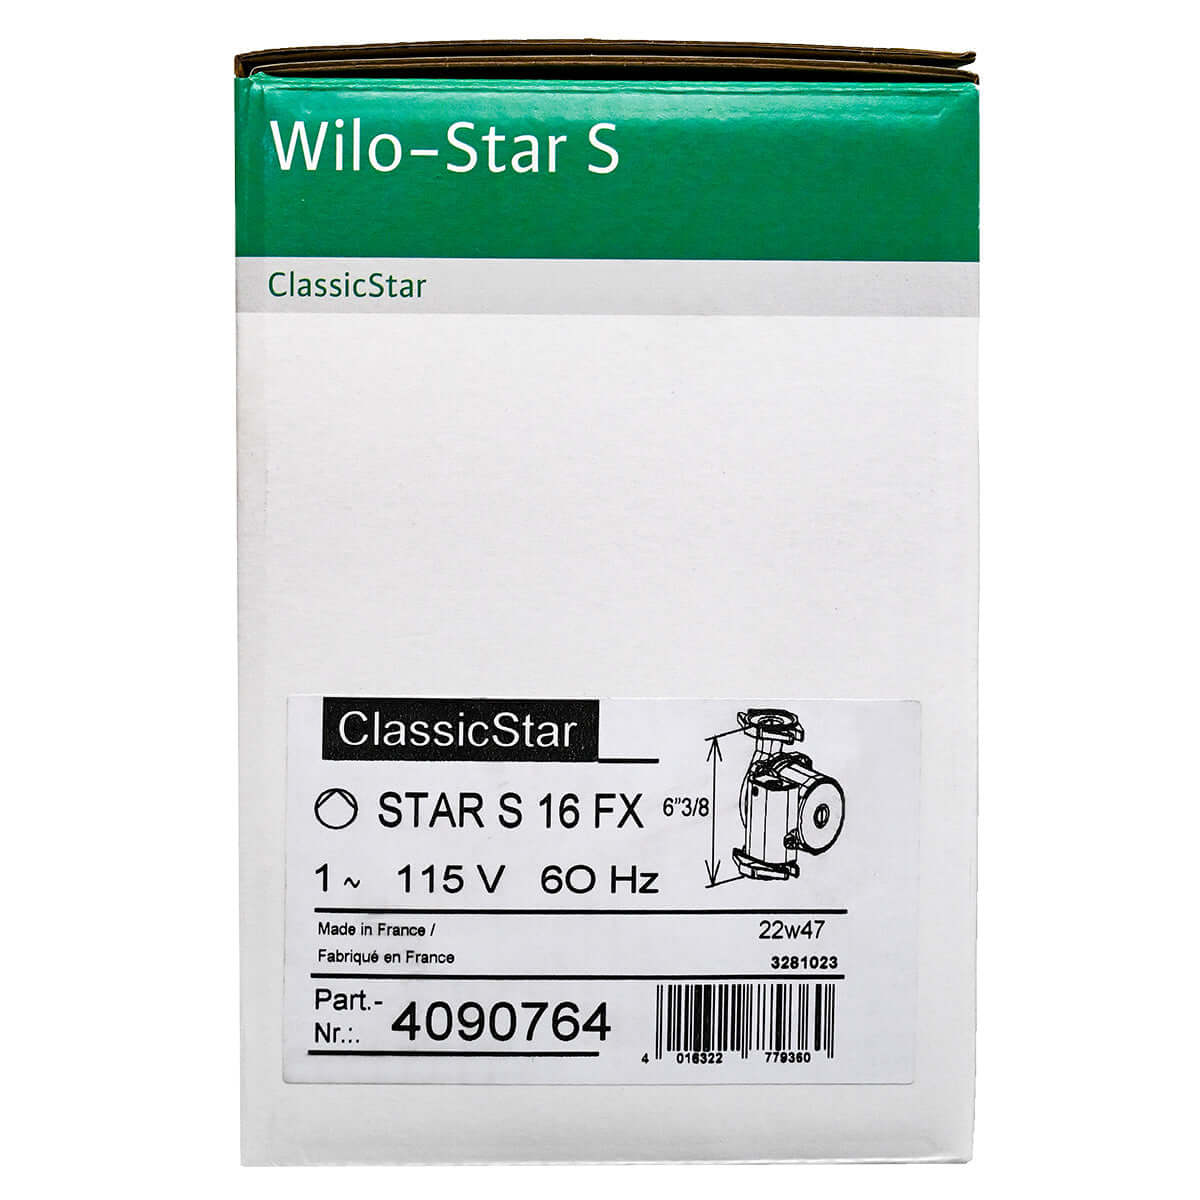 Wilo Star S 16 FX 3-Speed 90 degrees rotated flanges Cast Iron Star Series Circulator for hydronic radiant floor - box